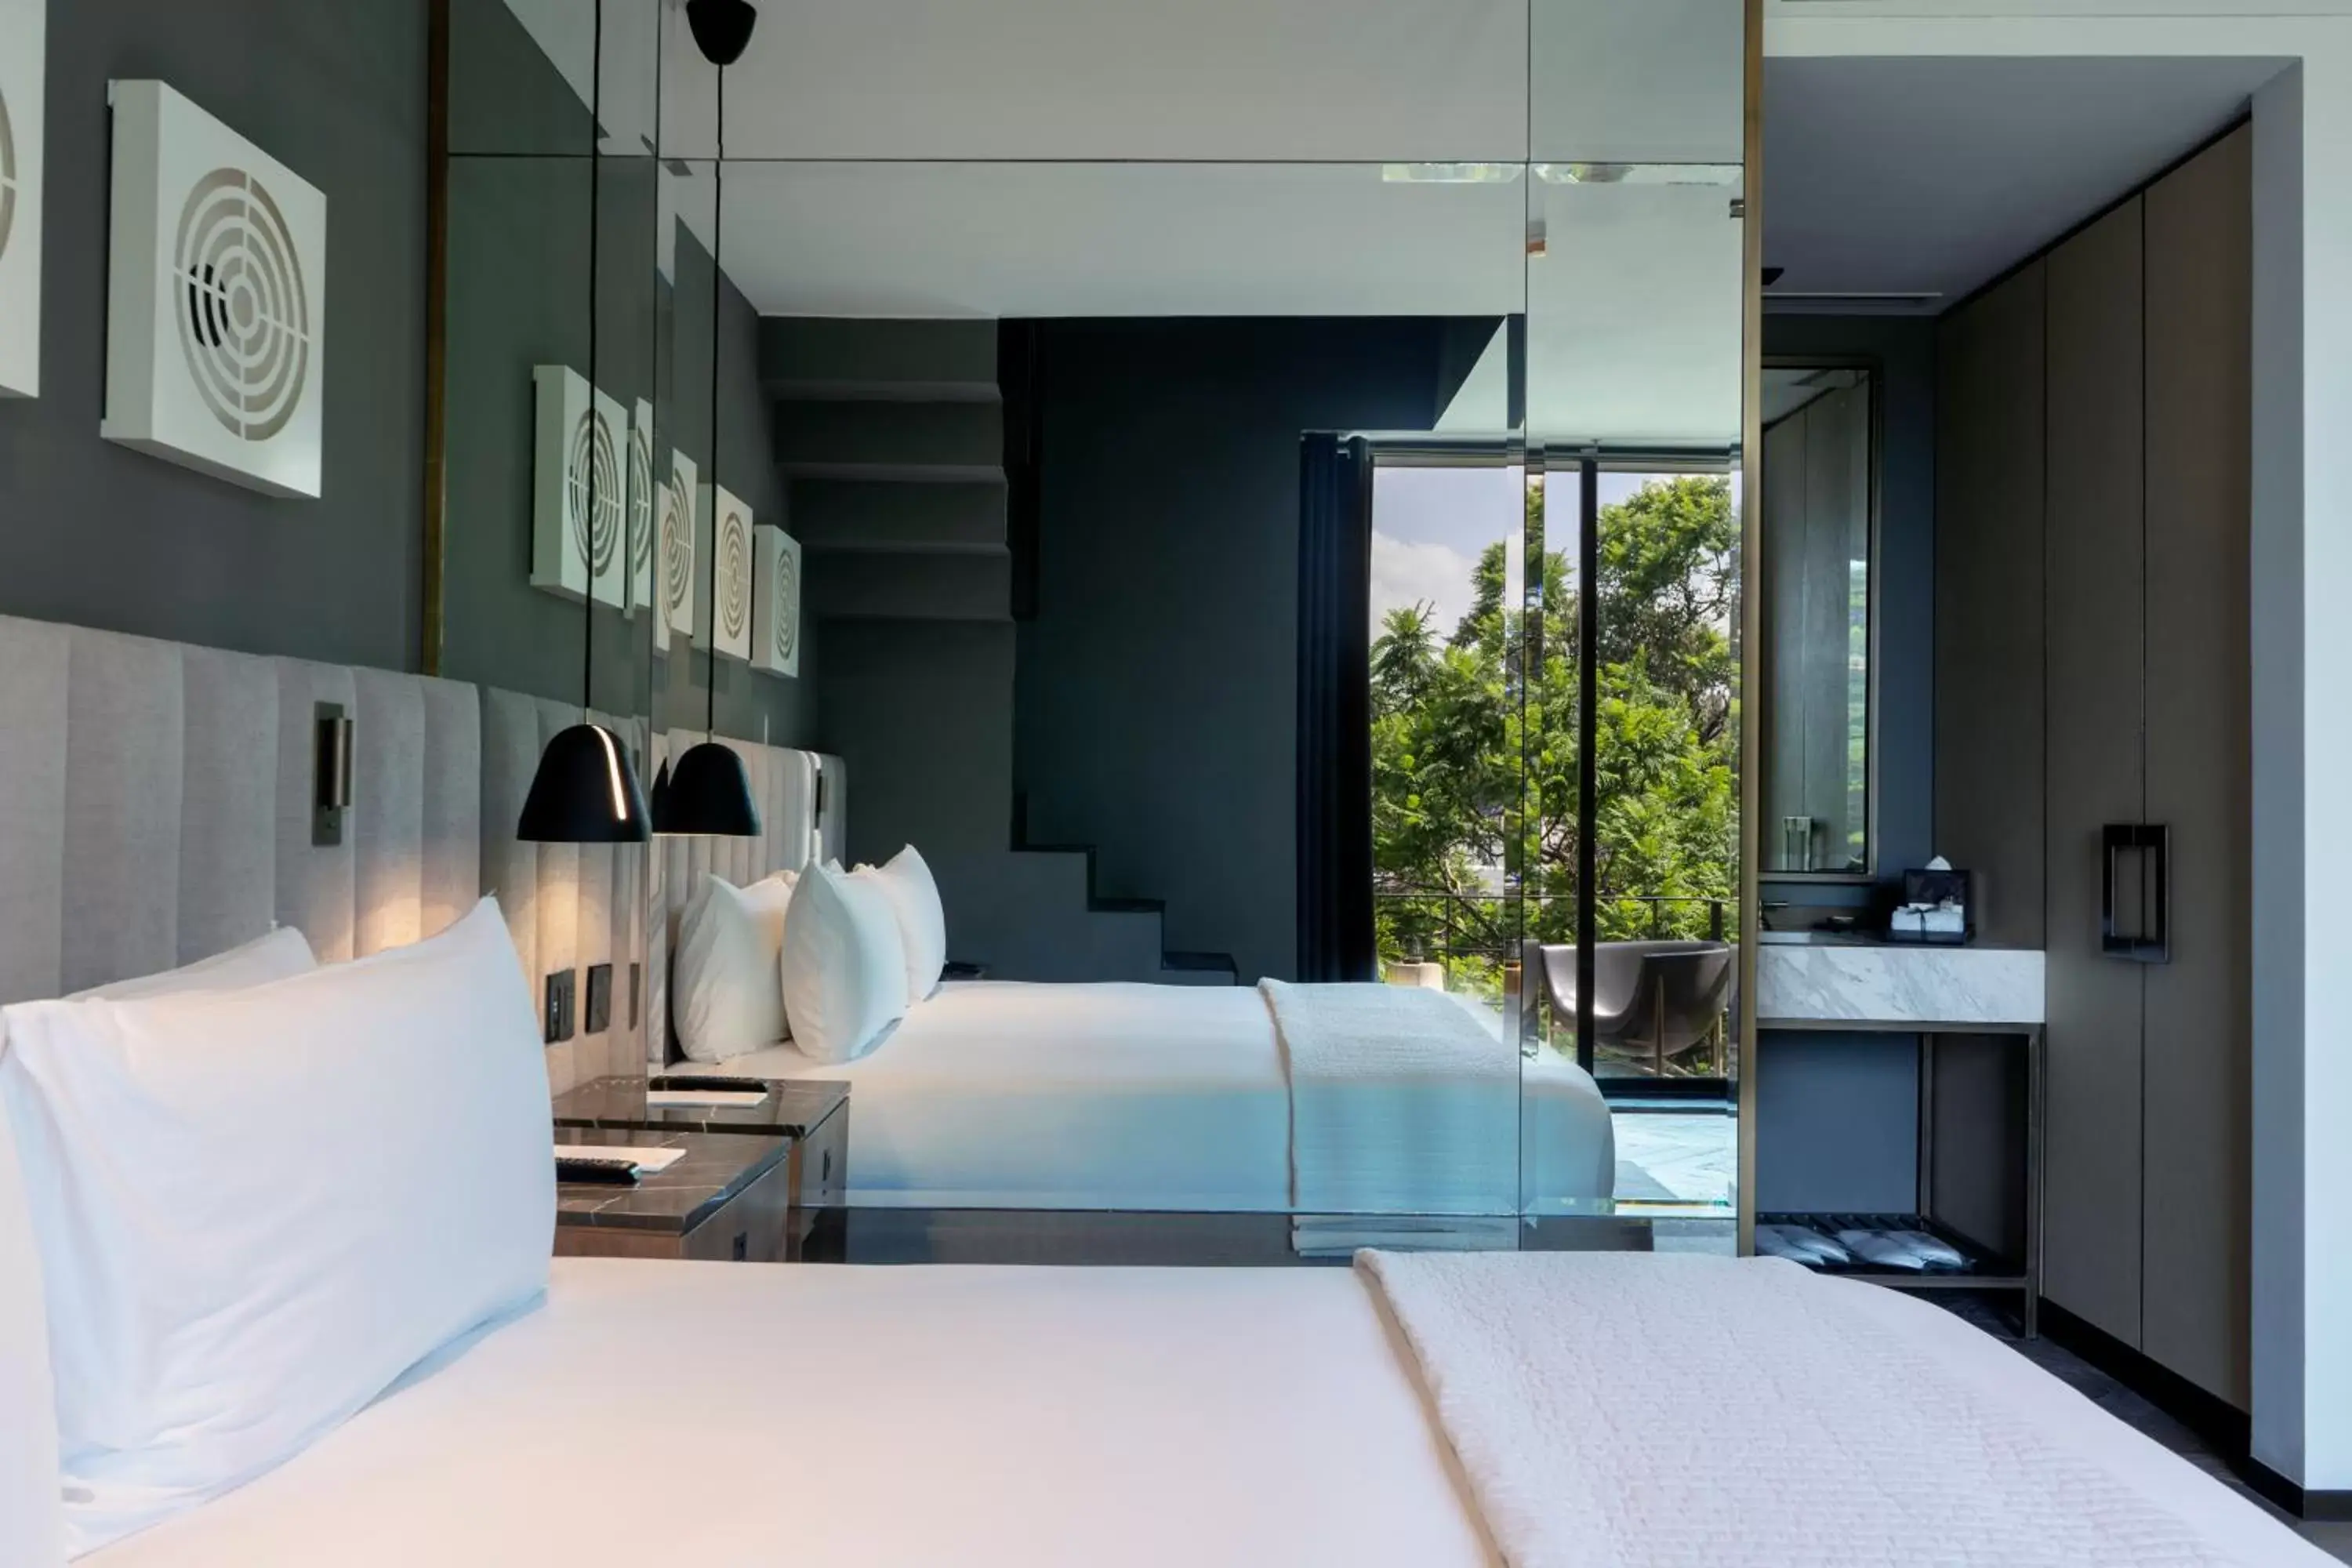 Bed in Brick Hotel Mexico City - Small Luxury Hotels of the World